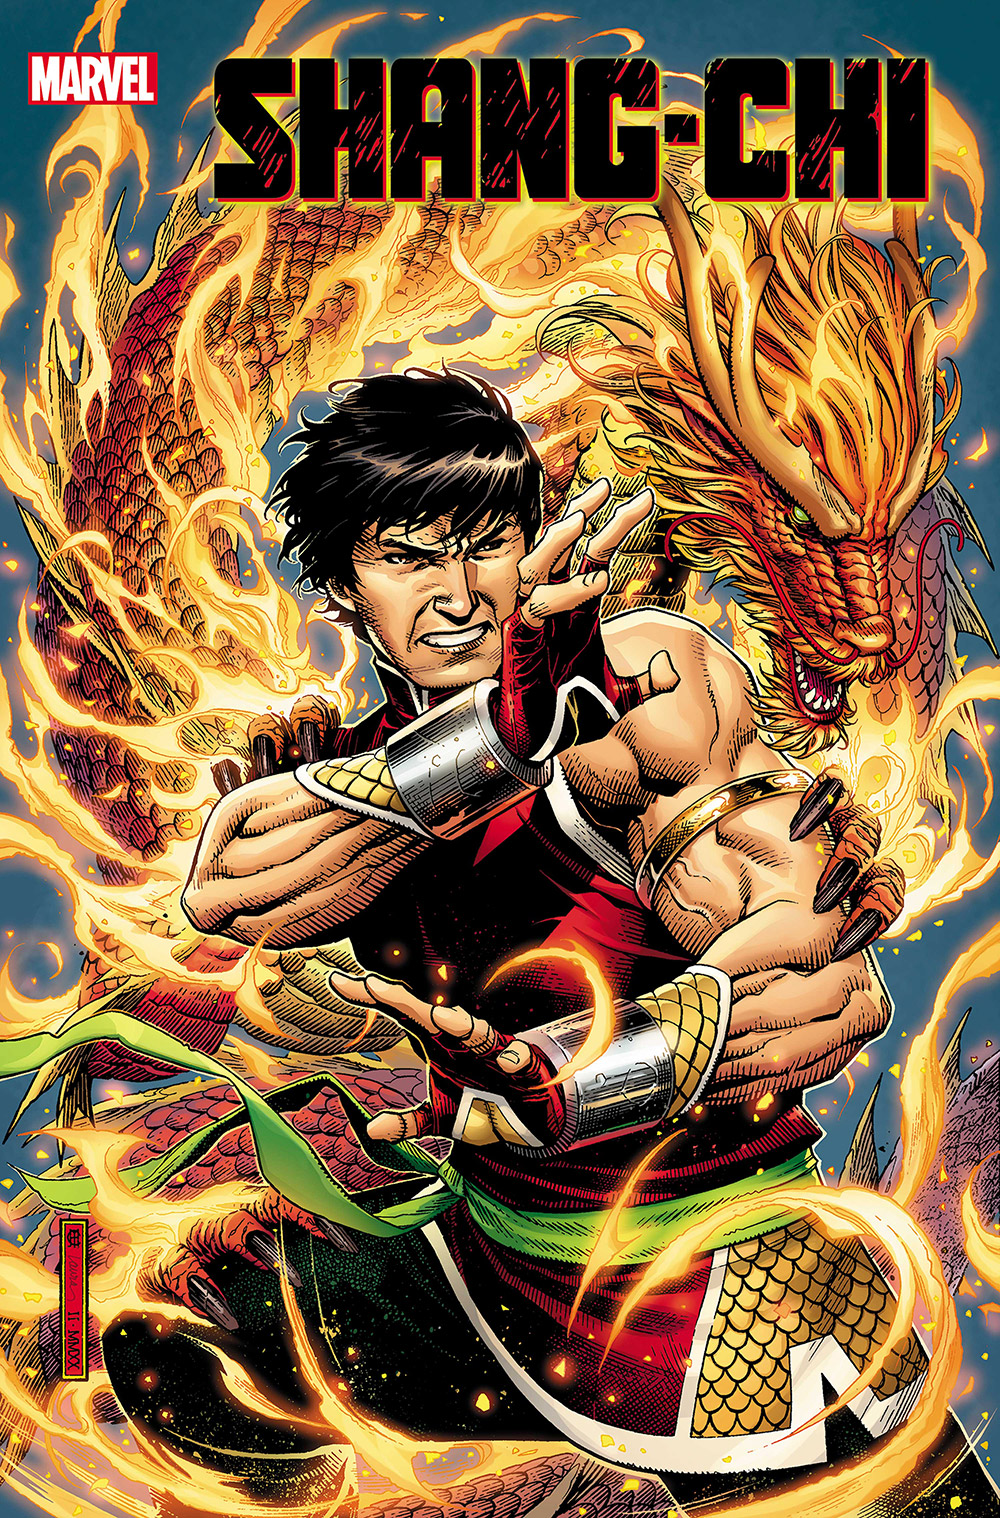 Shang-Chi by Doug Moench